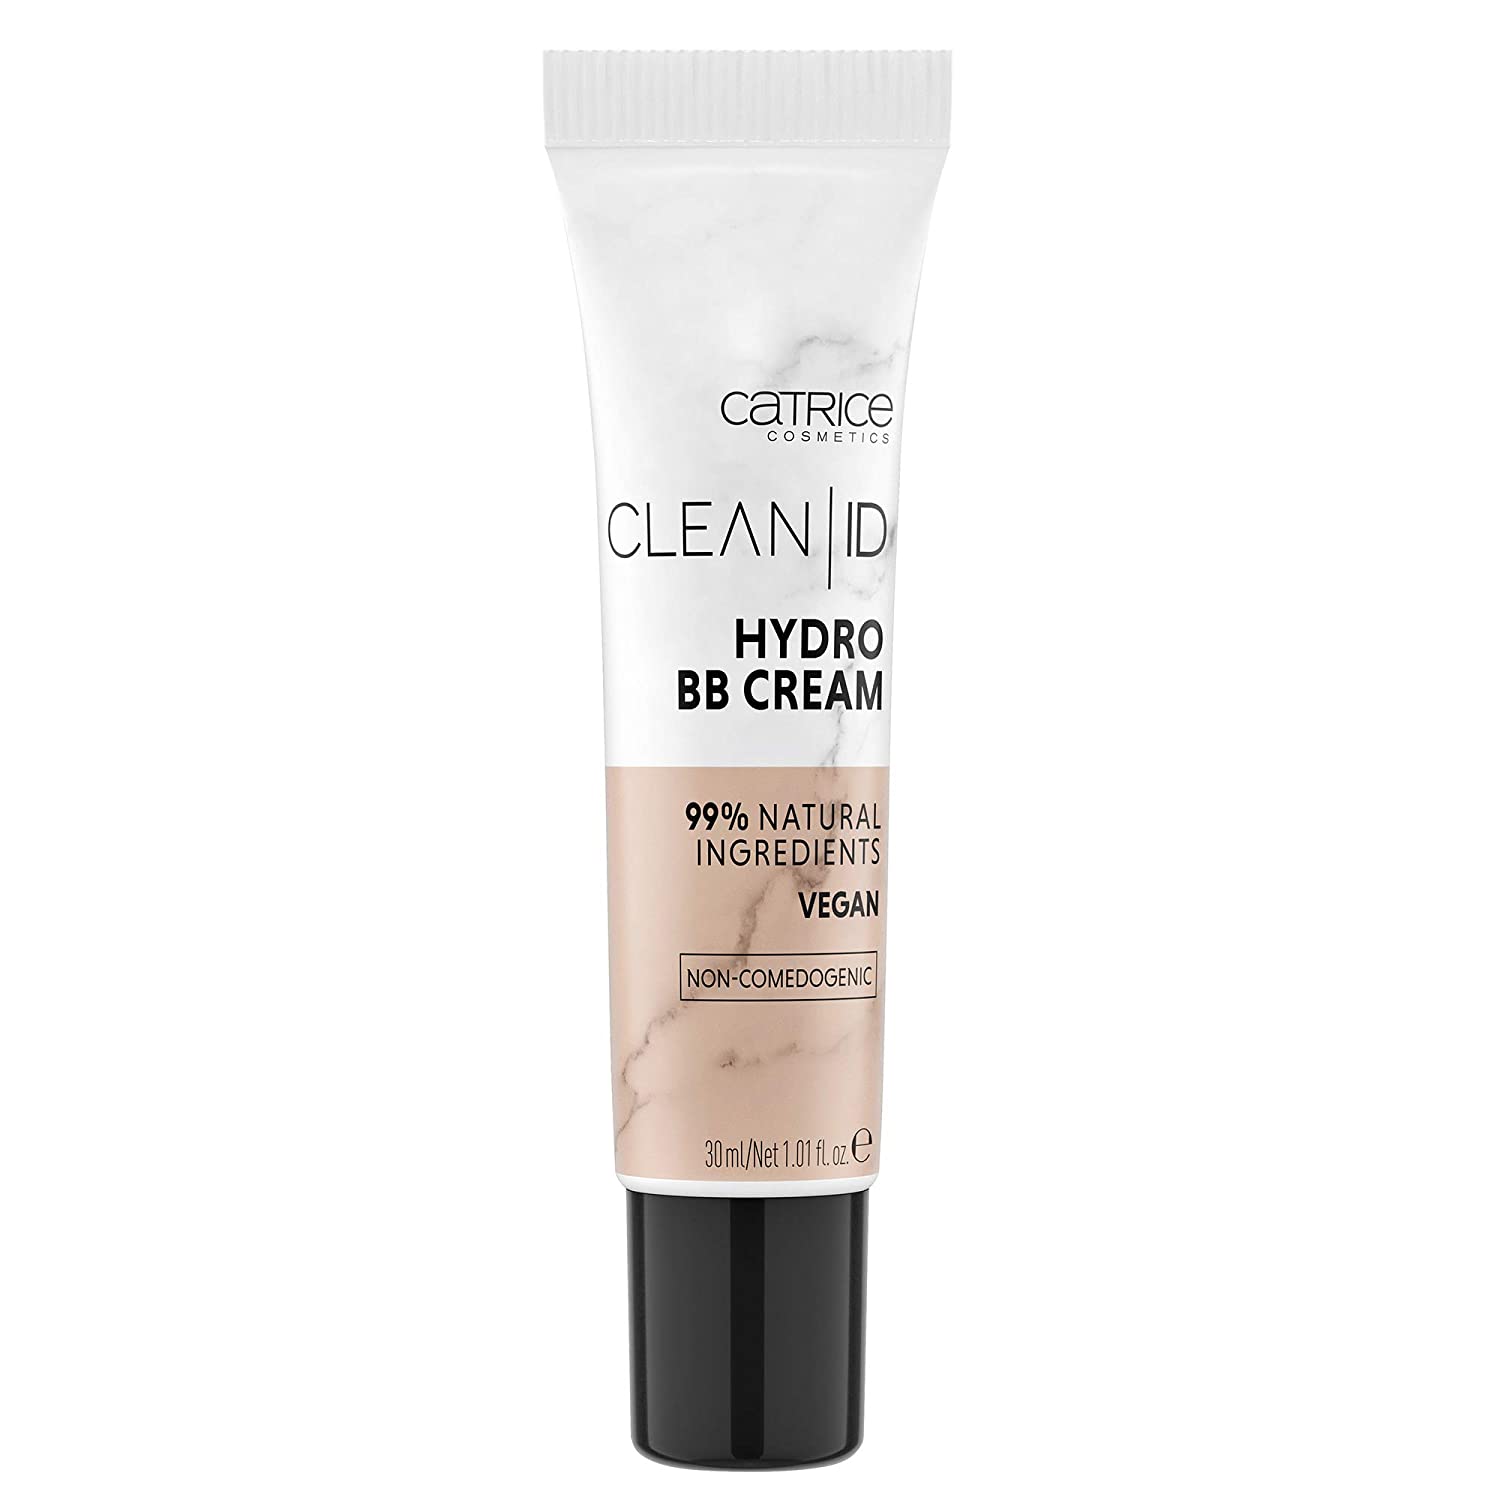 Catrice Clean ID Hydro BB Cream, Make Up, Foundation, No. 010 Light, Nude for Sensitive Skin, for Dry Skin, for Combination Skin, Moisturising, Natural, Vegan, Perfume Free (30 ml), ‎010 light.